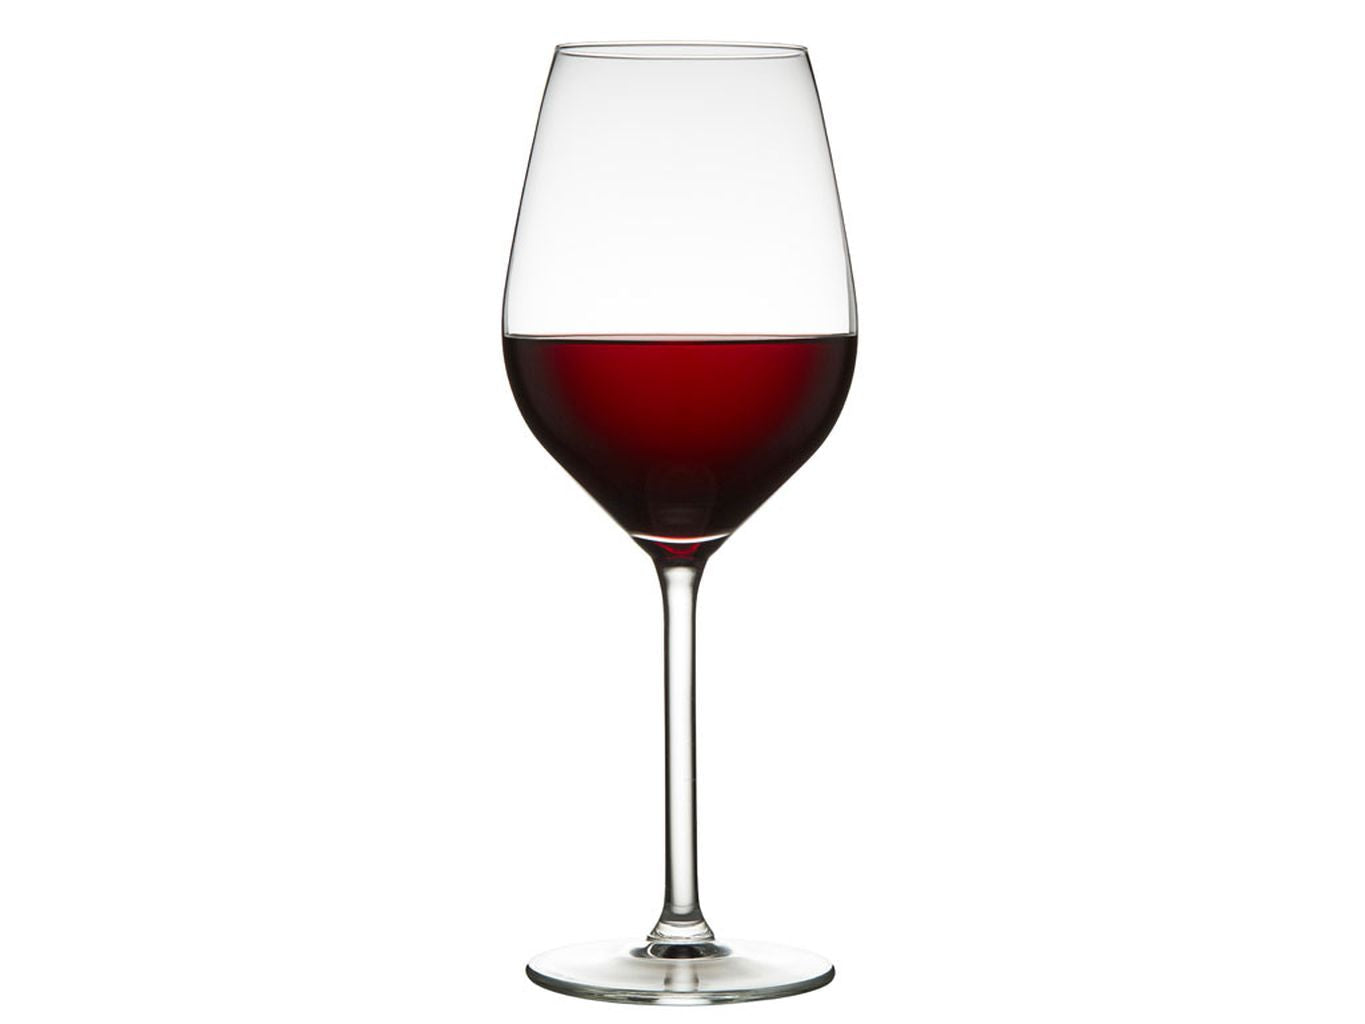 Lyngby Glas Juvel Red Wine Glass 50 cl，4个。